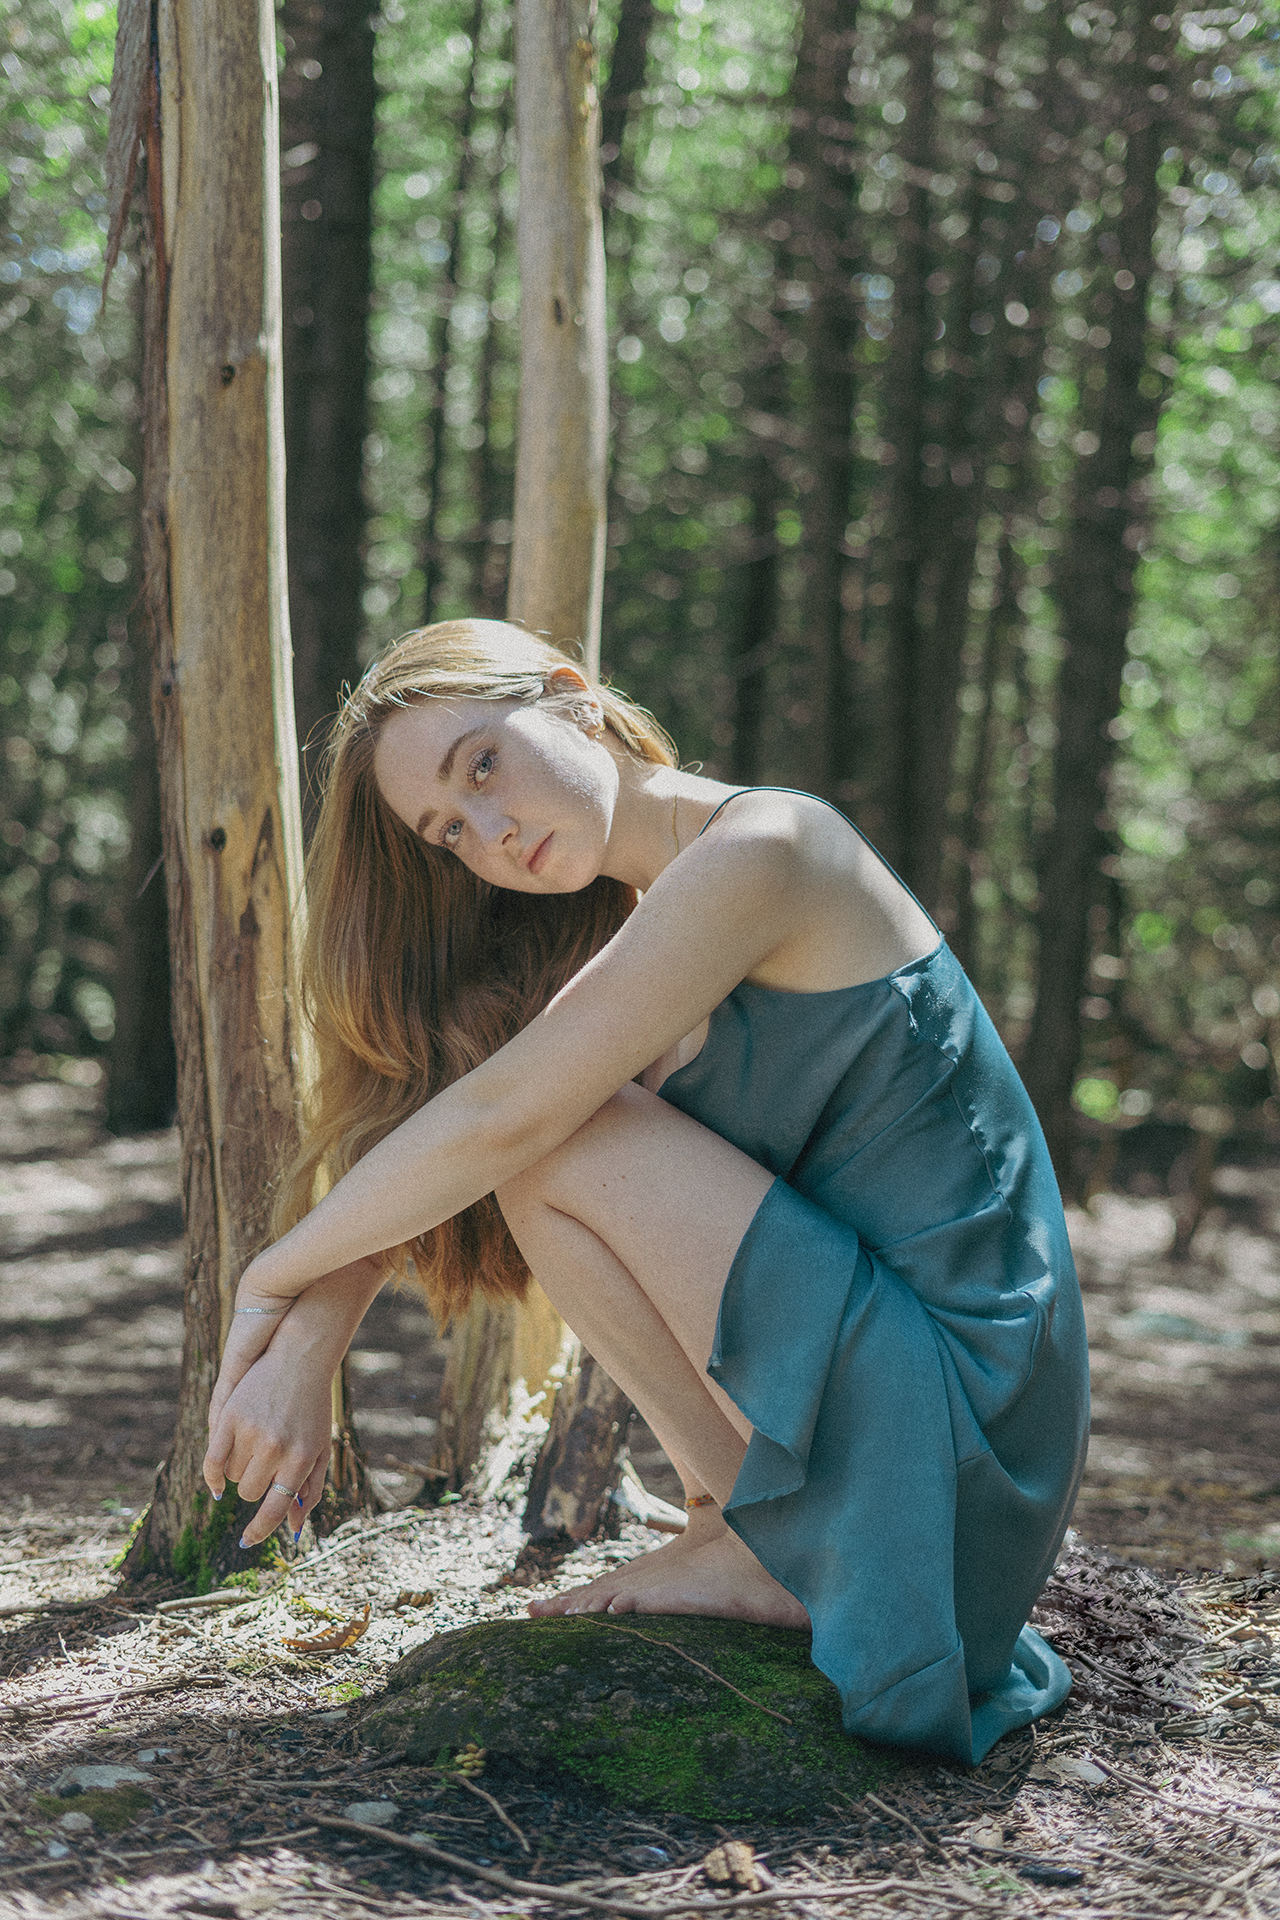 A young woman in a forest in a teal dress crouches on a mossy rock while bare foot